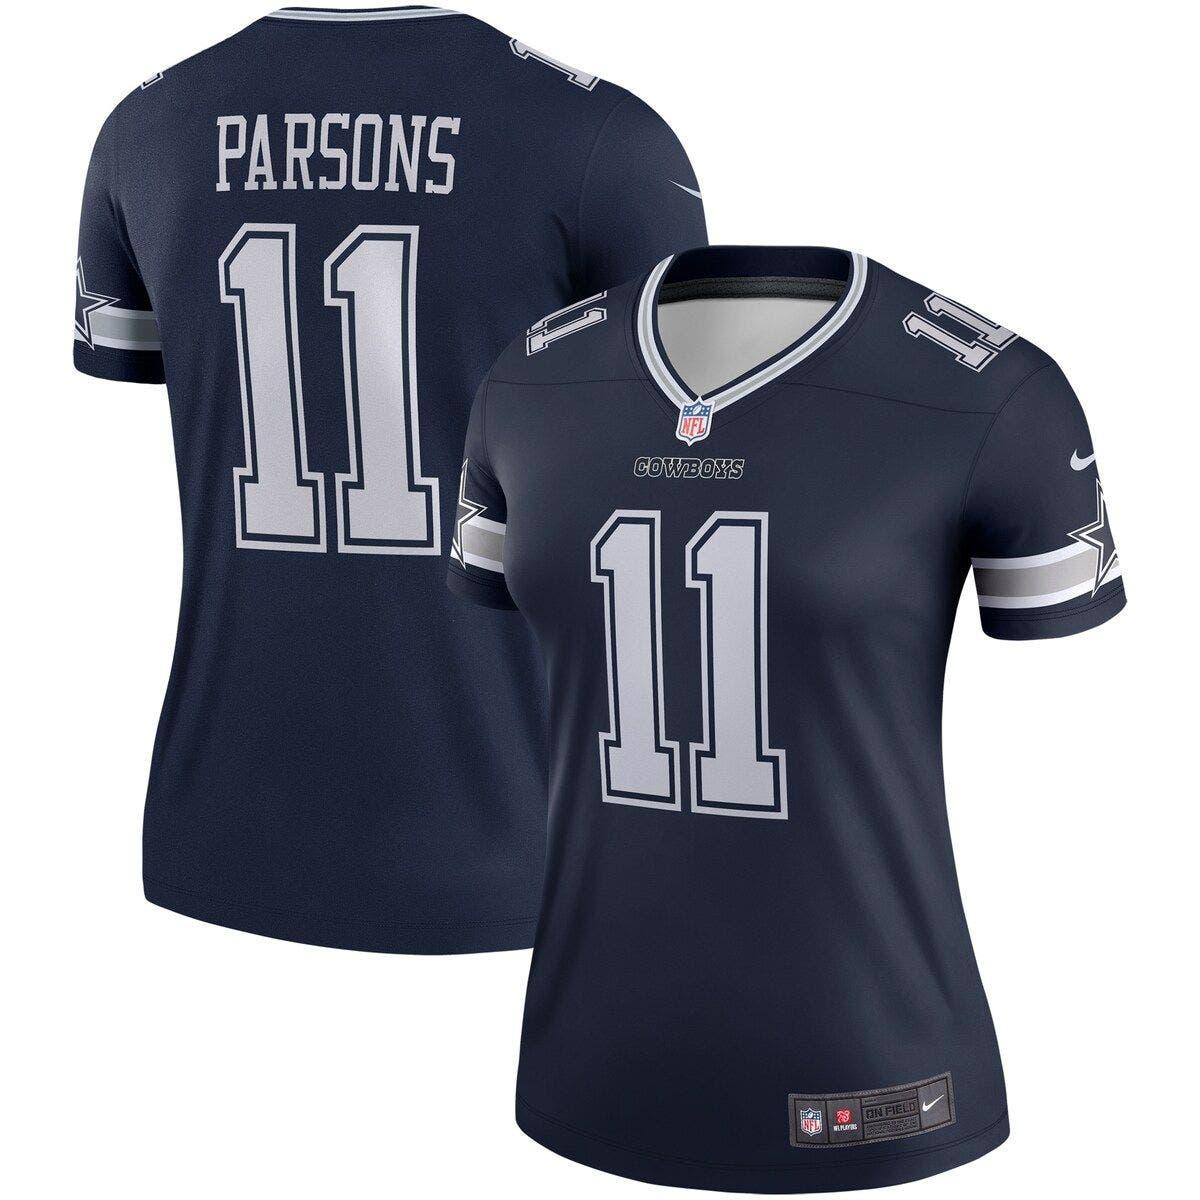 Nike Micah Parsons Navy Dallas Cowboys Legend Jersey At Nordstrom in Blue